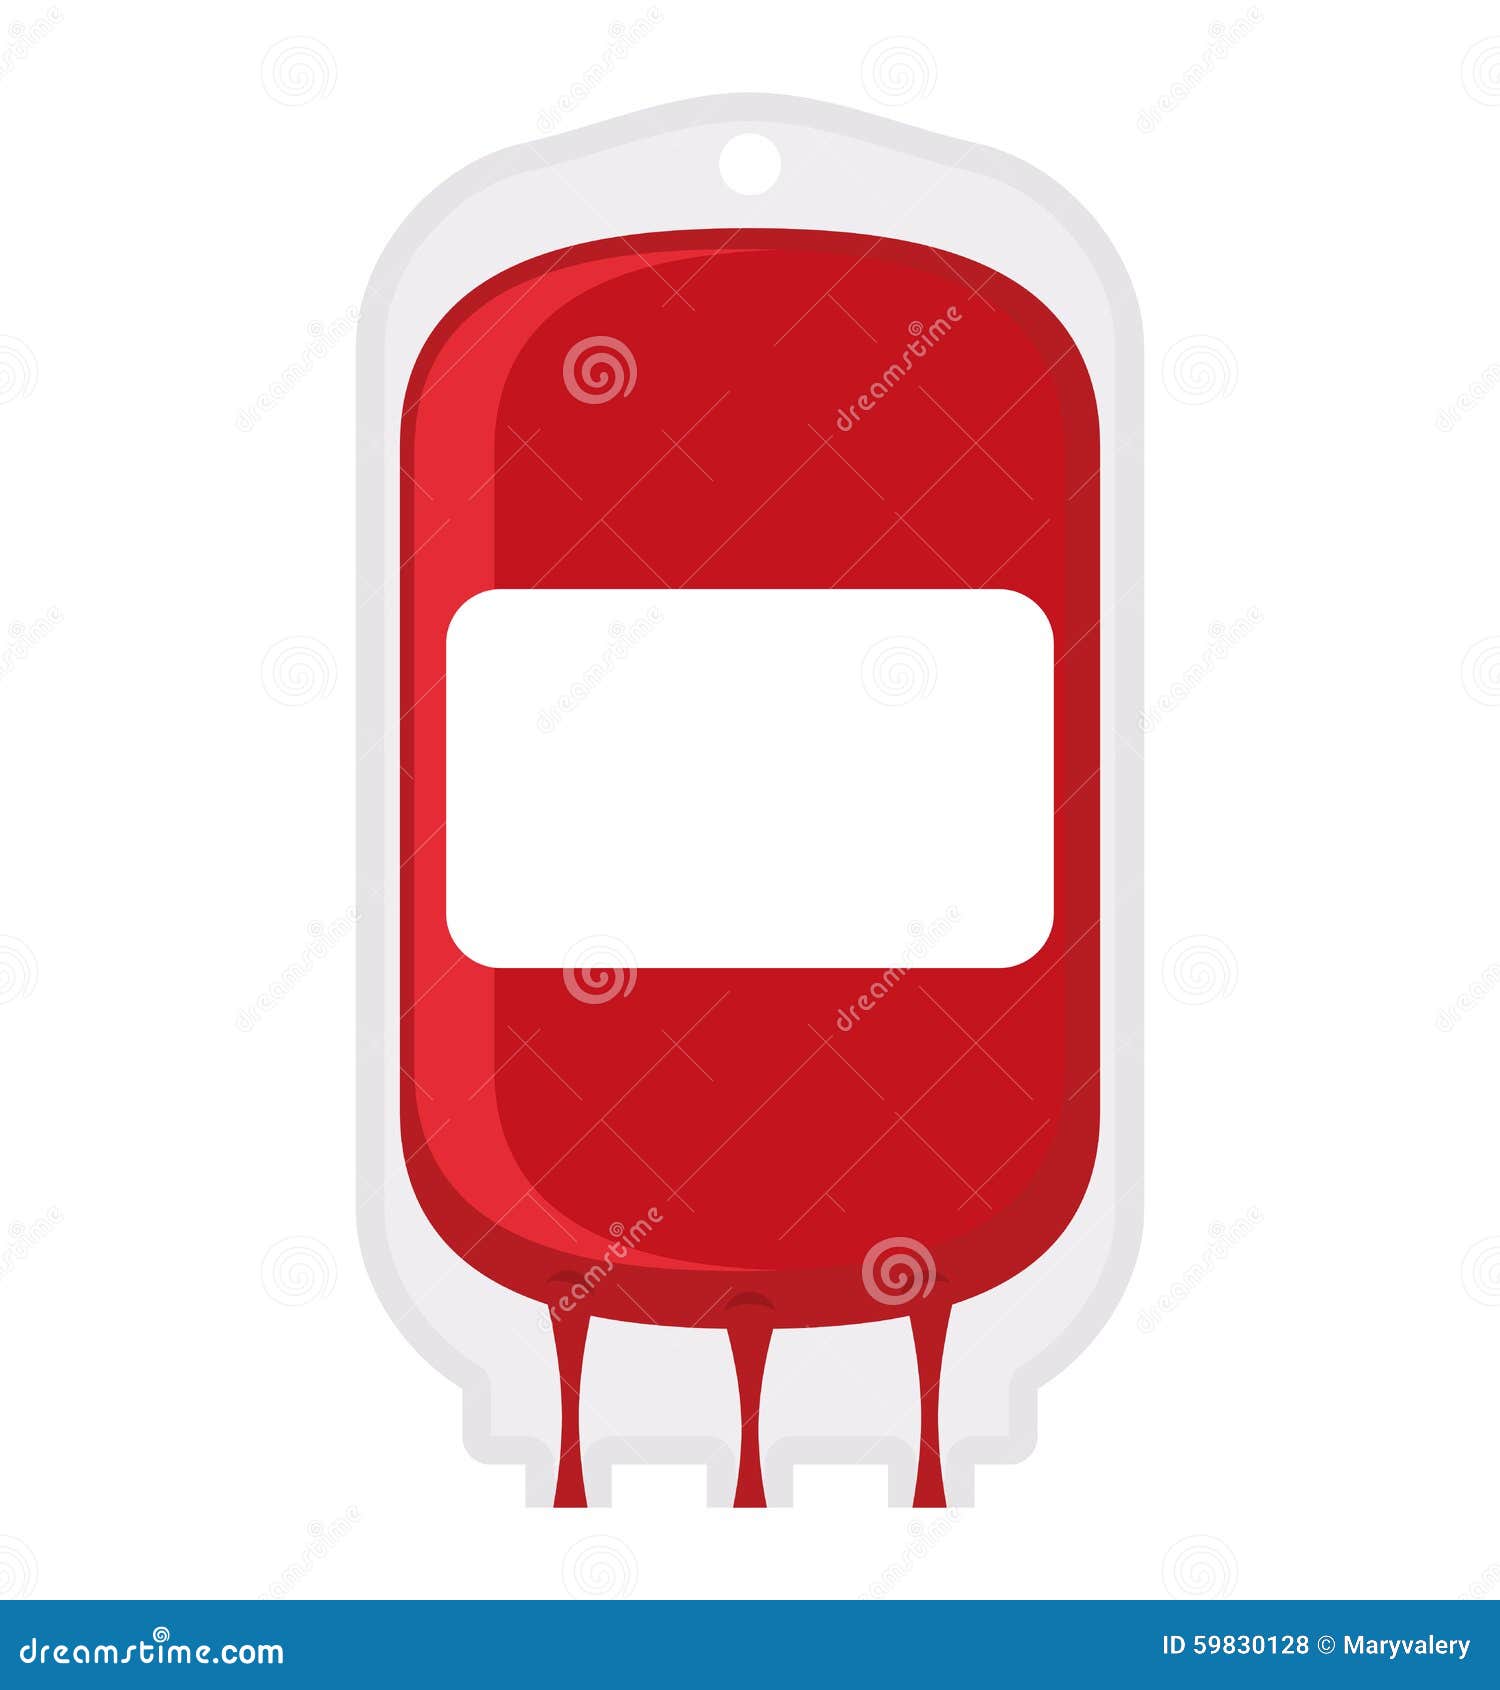 blood type clipart - photo #45